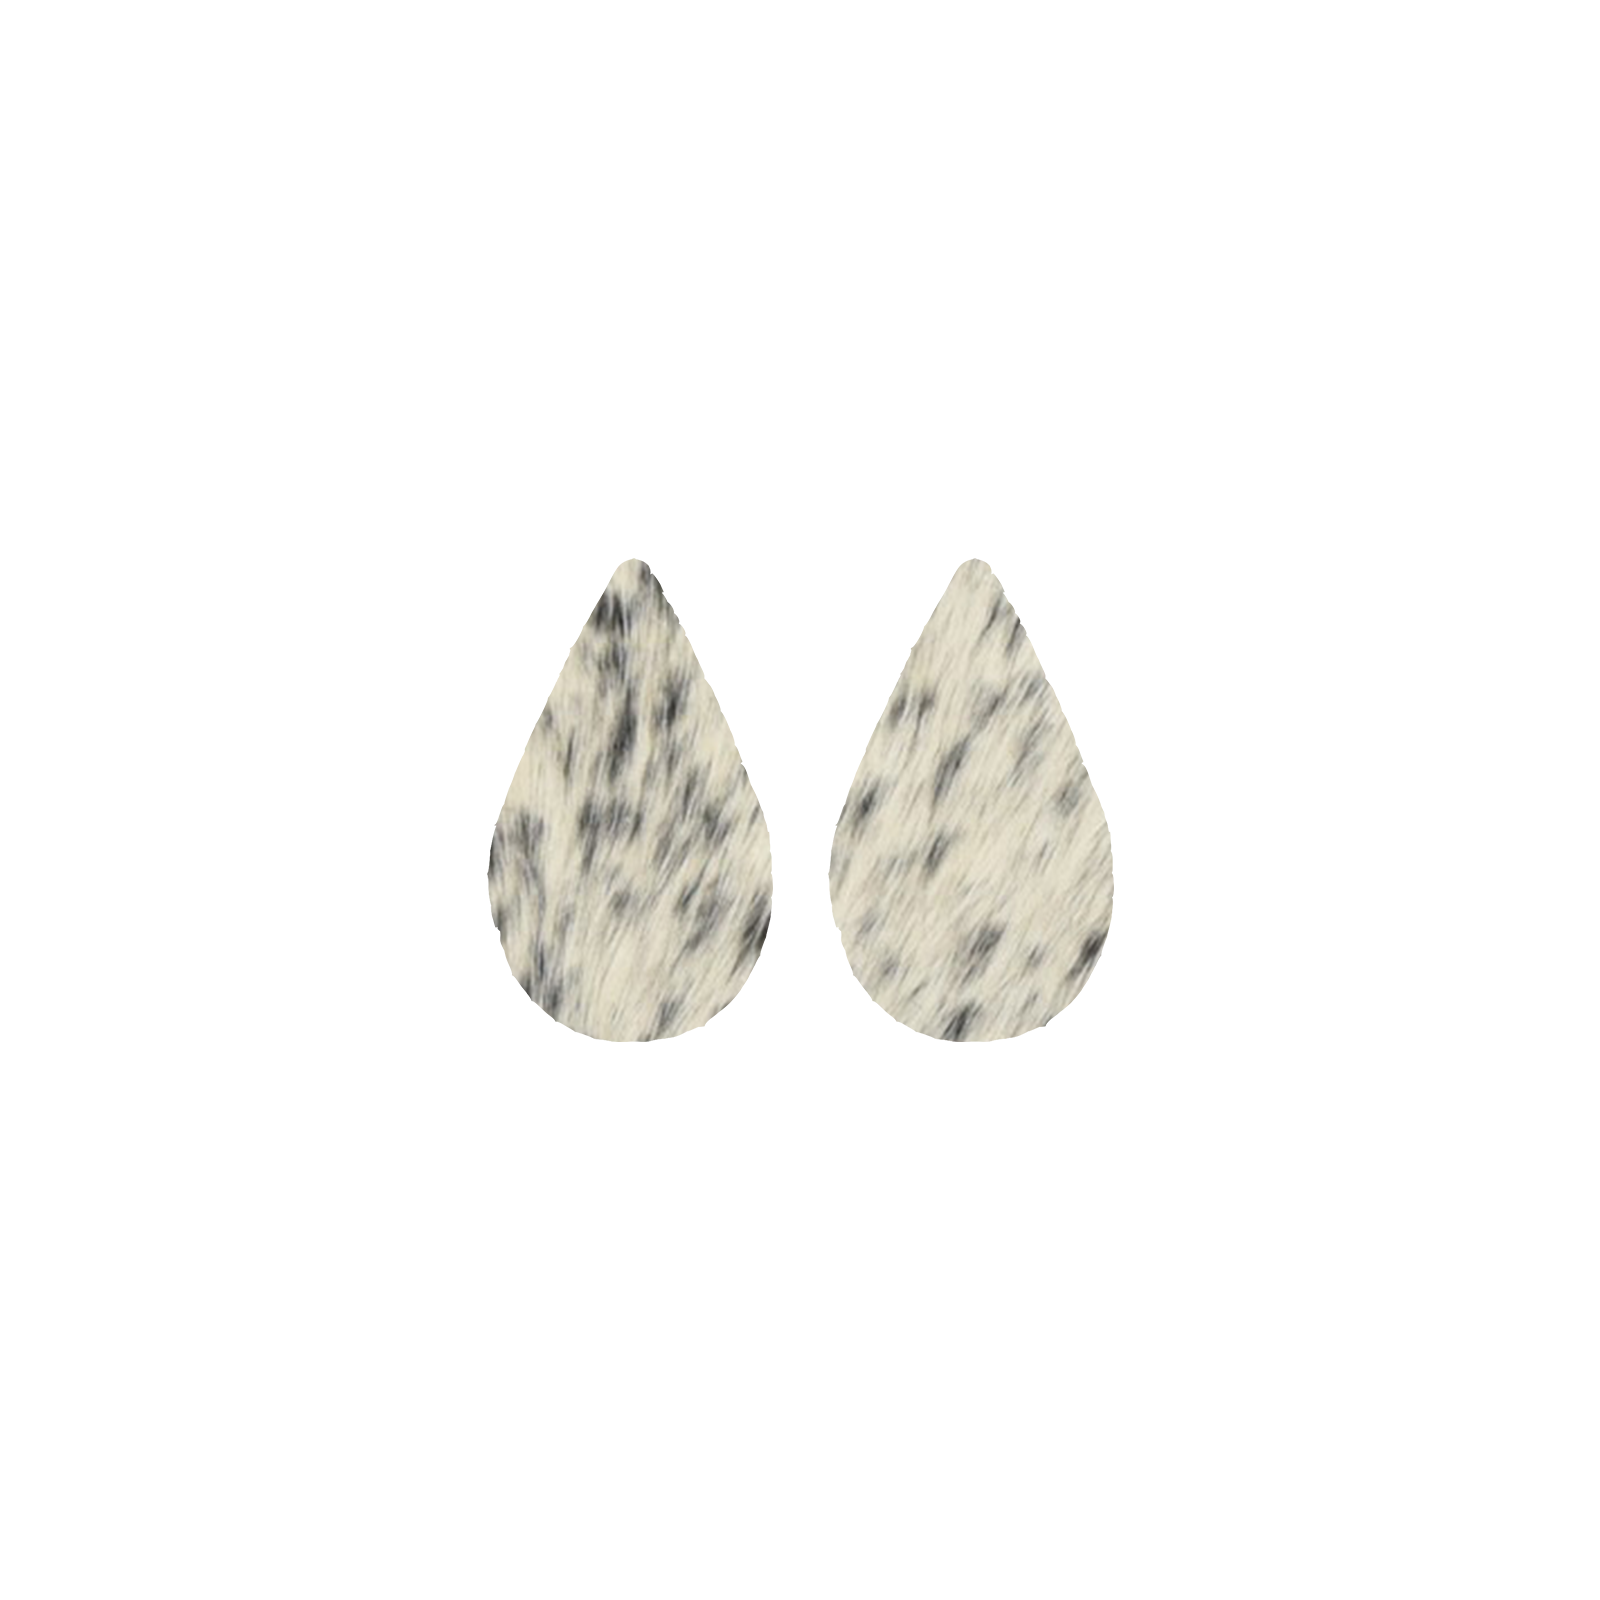 Spotted Light Black and Off White Hair On Die Cut Earrings, Medium Teardrop | The Leather Guy